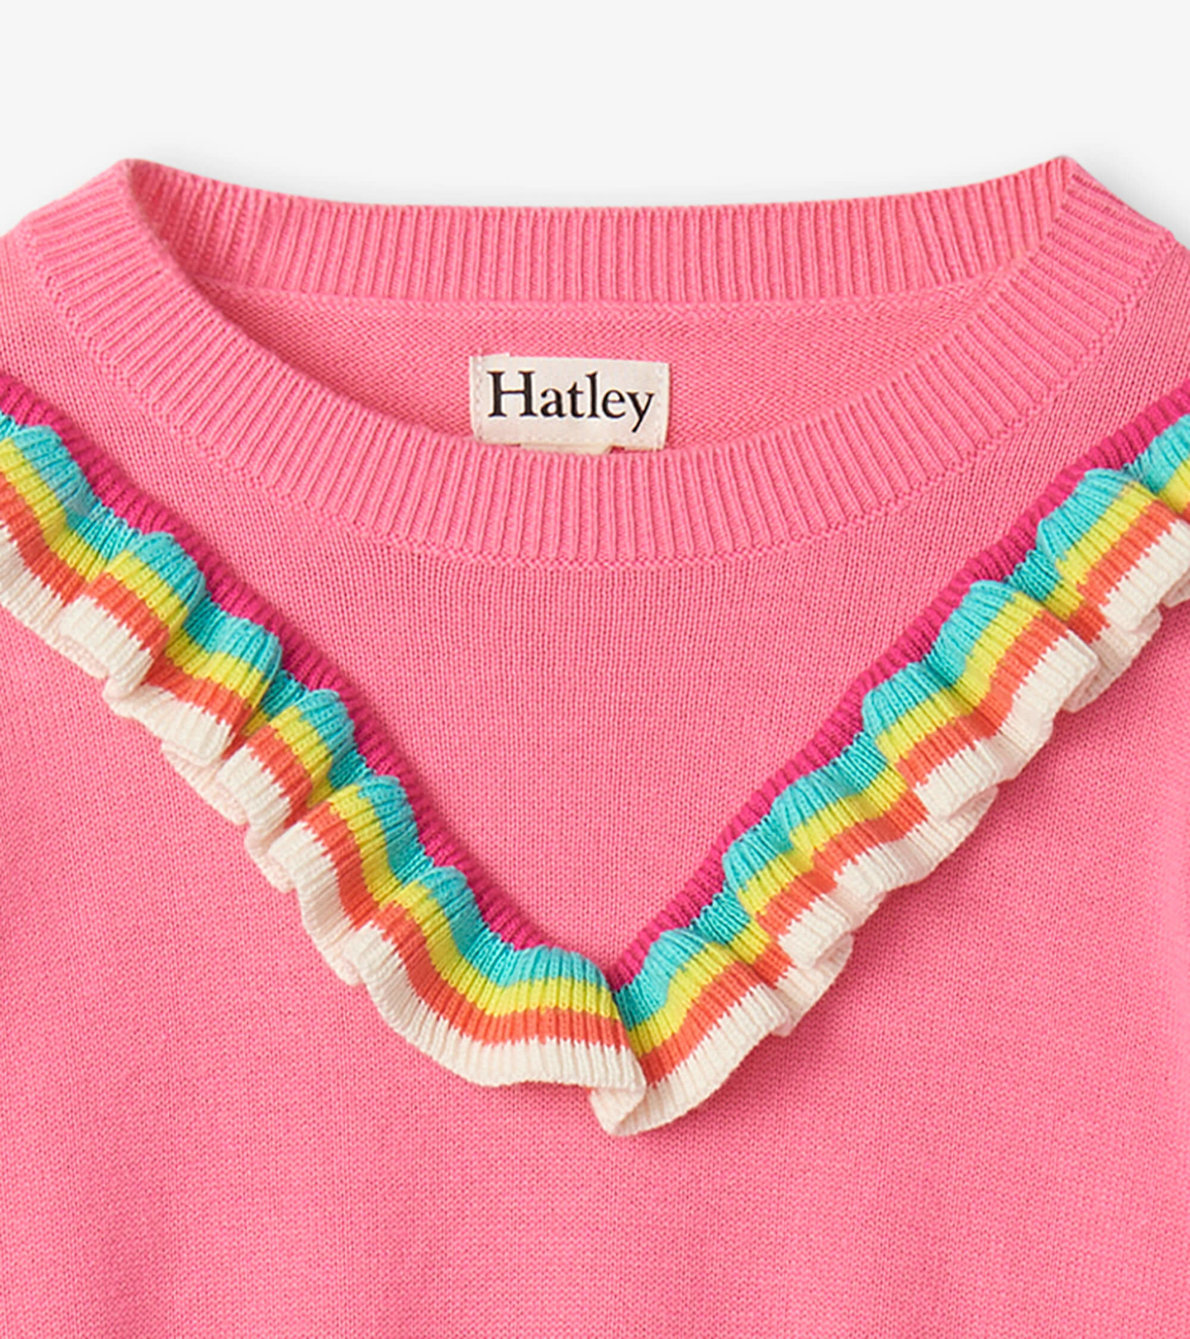 View larger image of Girls Pink Rainbow Ruffle Sweater